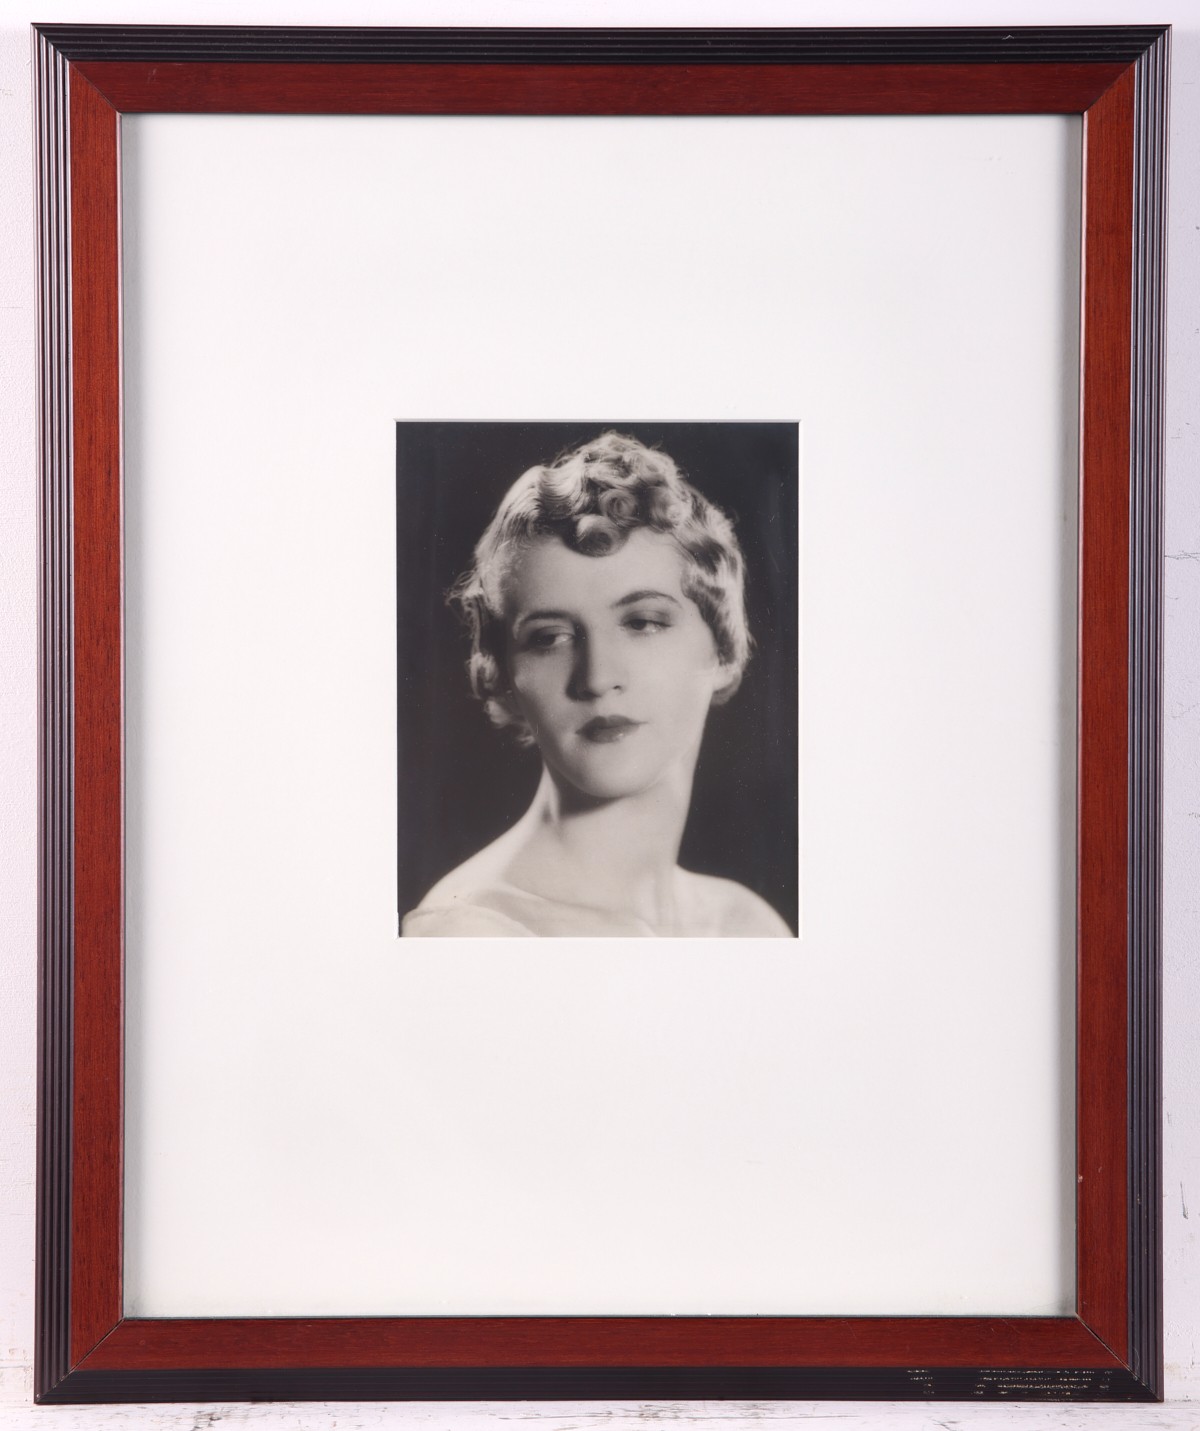 Framed Portrait Photograph Woman - Image 2 of 3